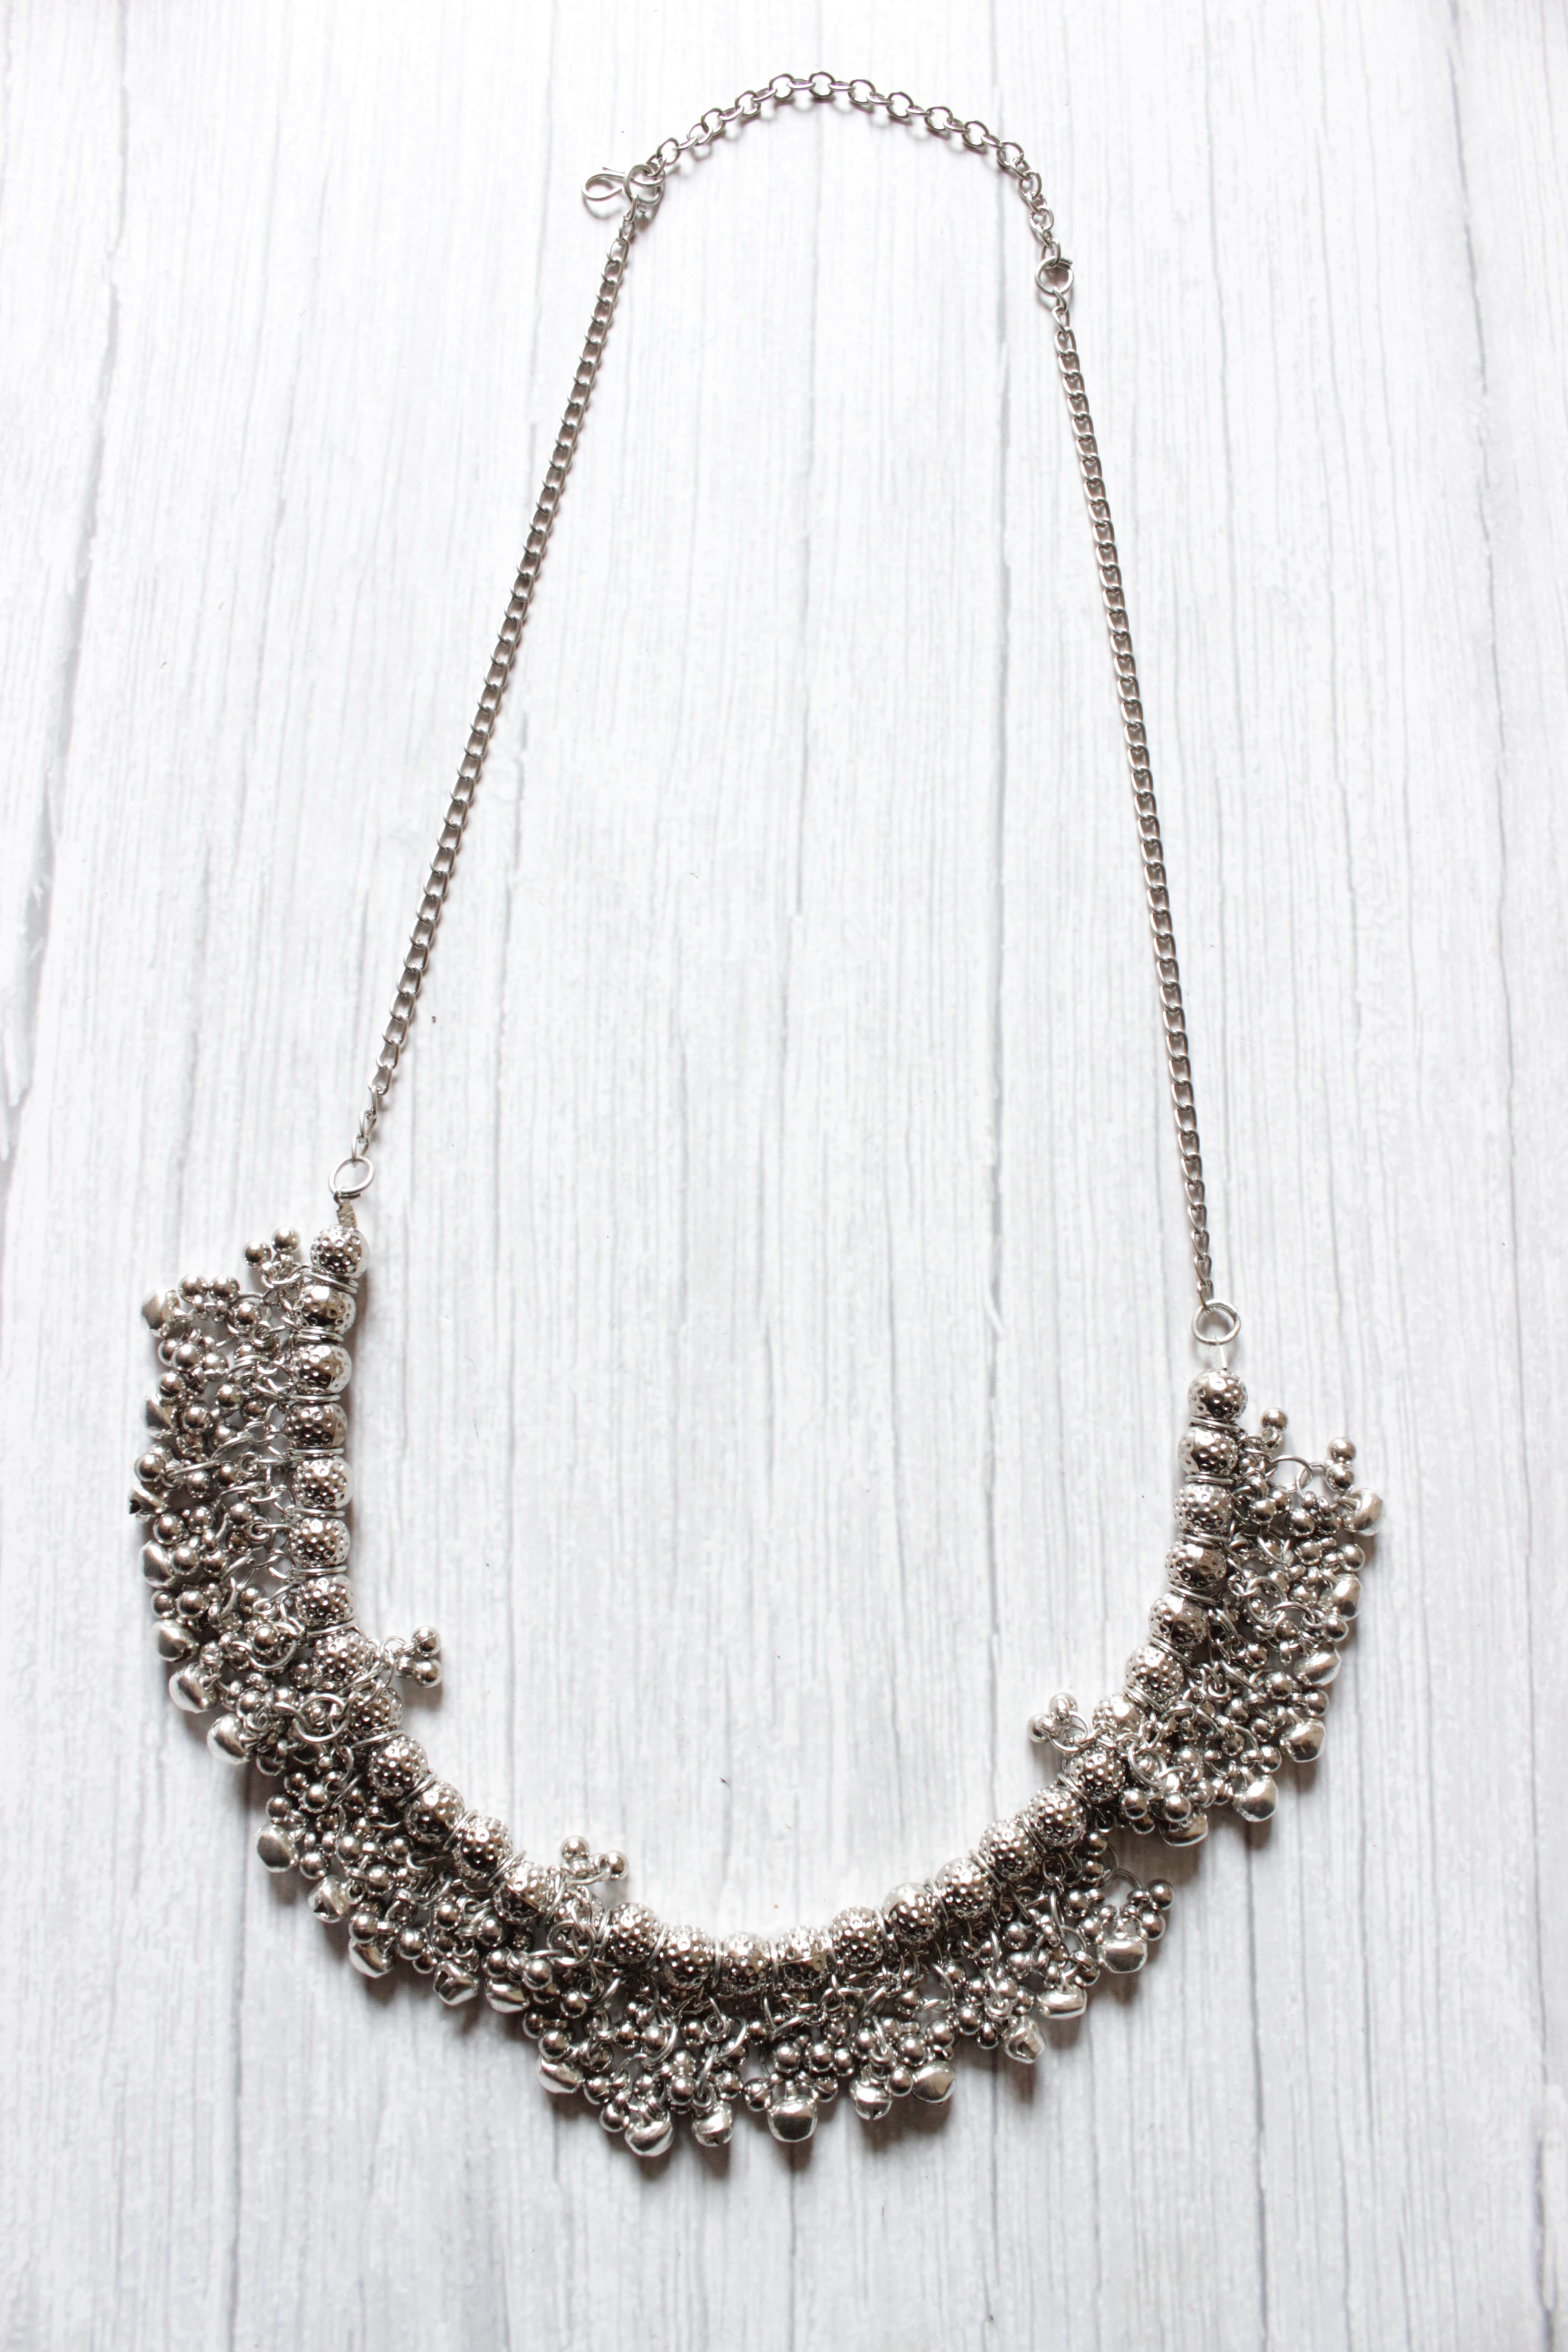 Oxidised Finish Long Chain Necklace with Ghungroo Shaped Beads